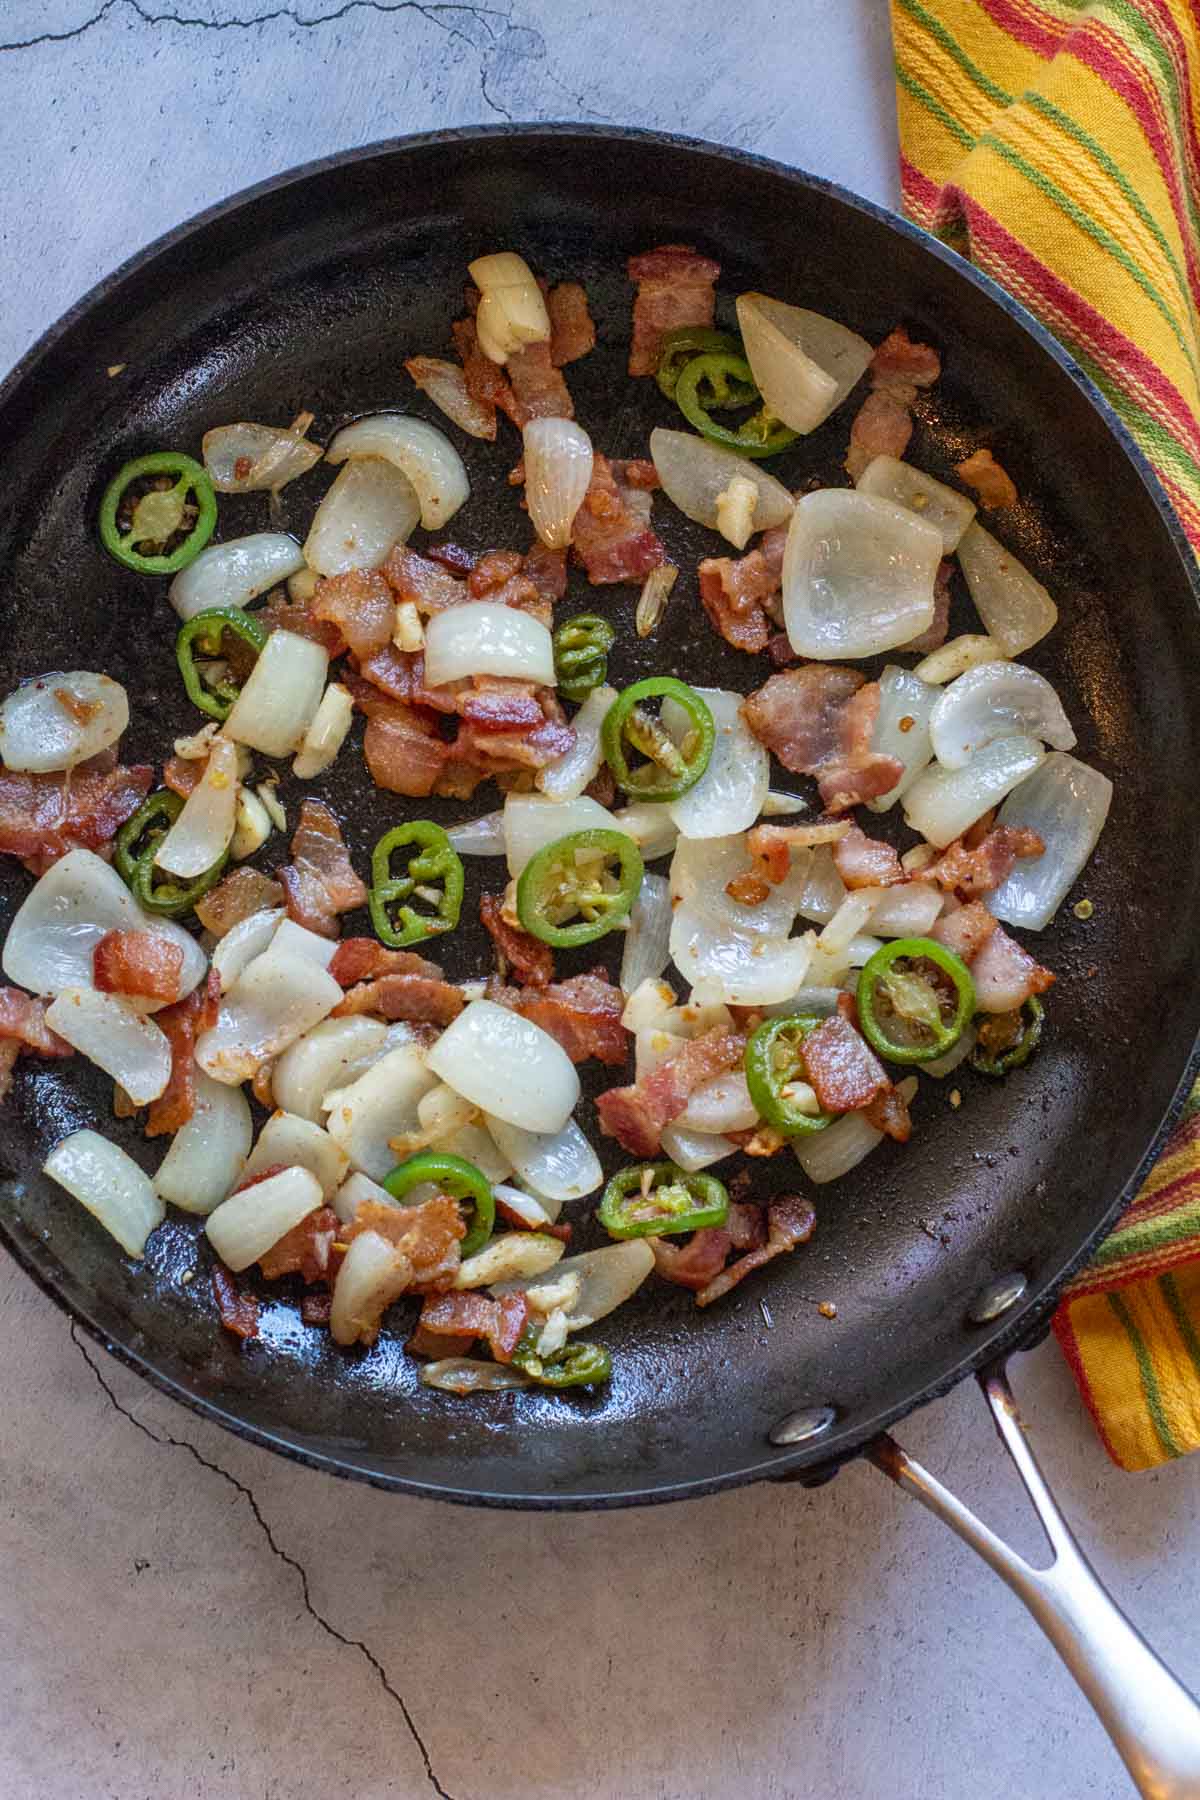 Cooking bacon and vegetables for Cowboy Beans.